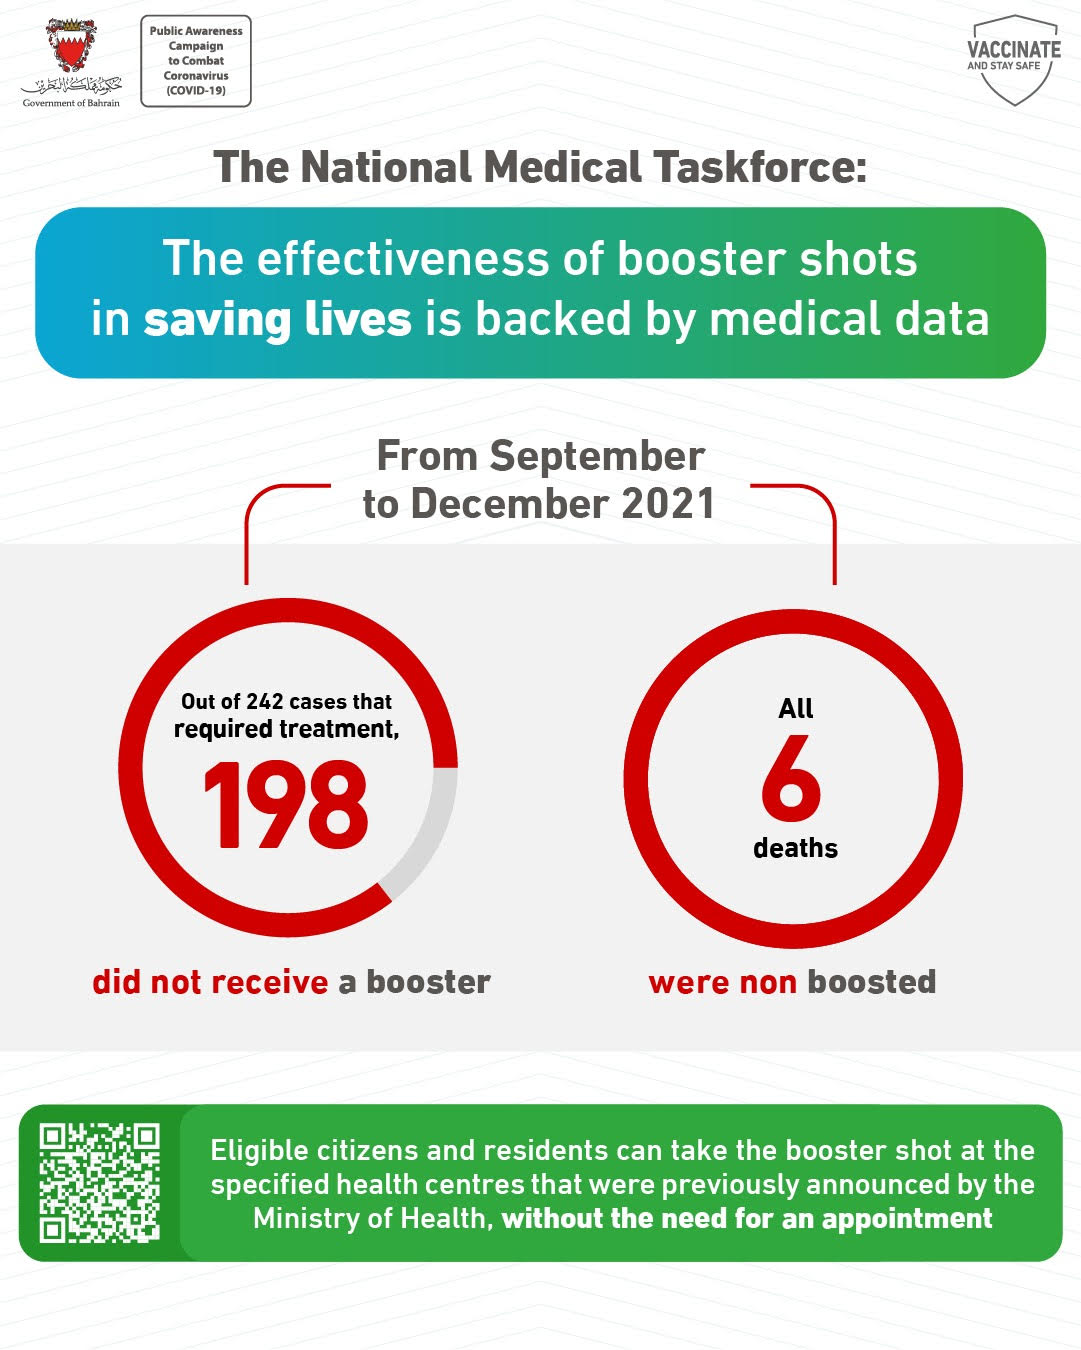 The National Medical Taskforce highlights the effectiveness of booster shots in saving lives, backed by medical data: 27 December 2021